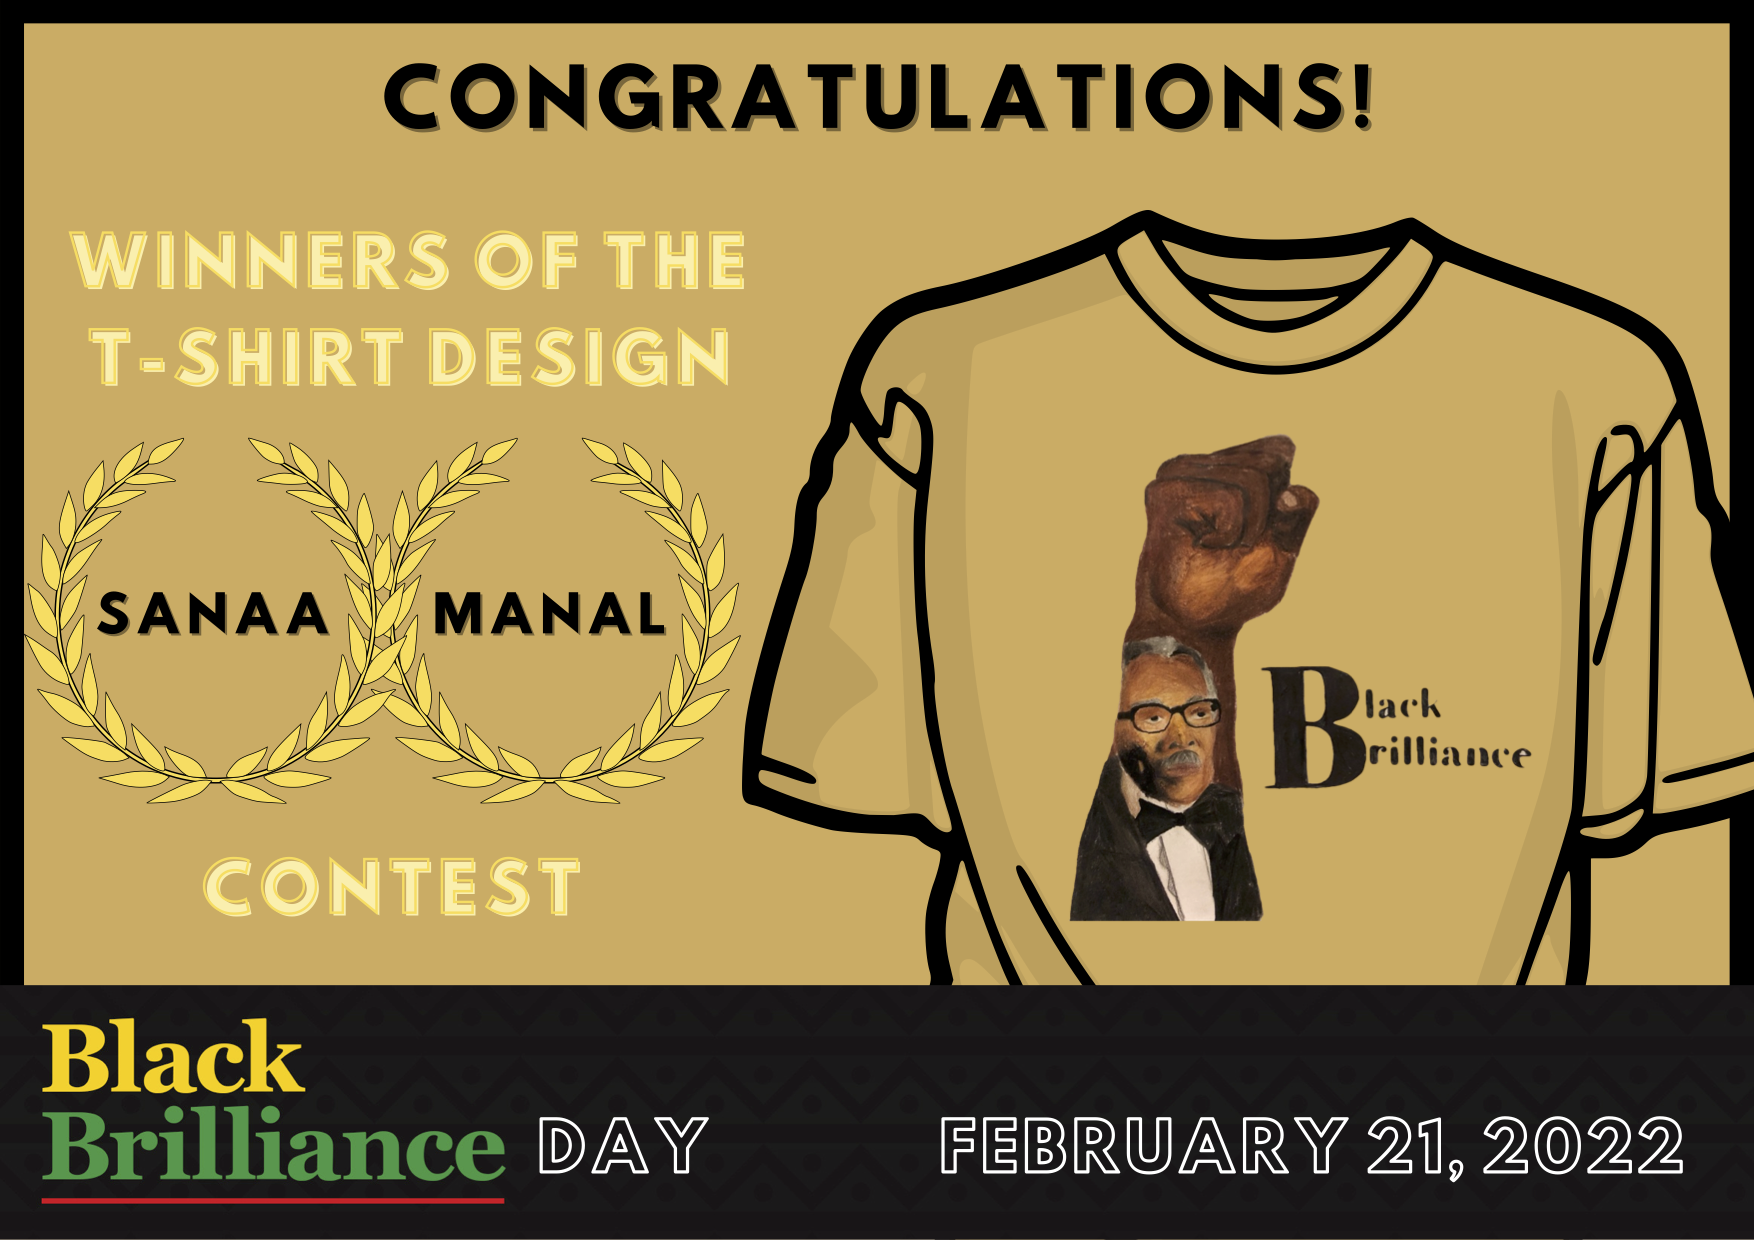 Winners of the Black Brilliance T-Shirt Design Contest. Congratulations Sanaa and Manal. Black Brilliance Day February 21, 2022.